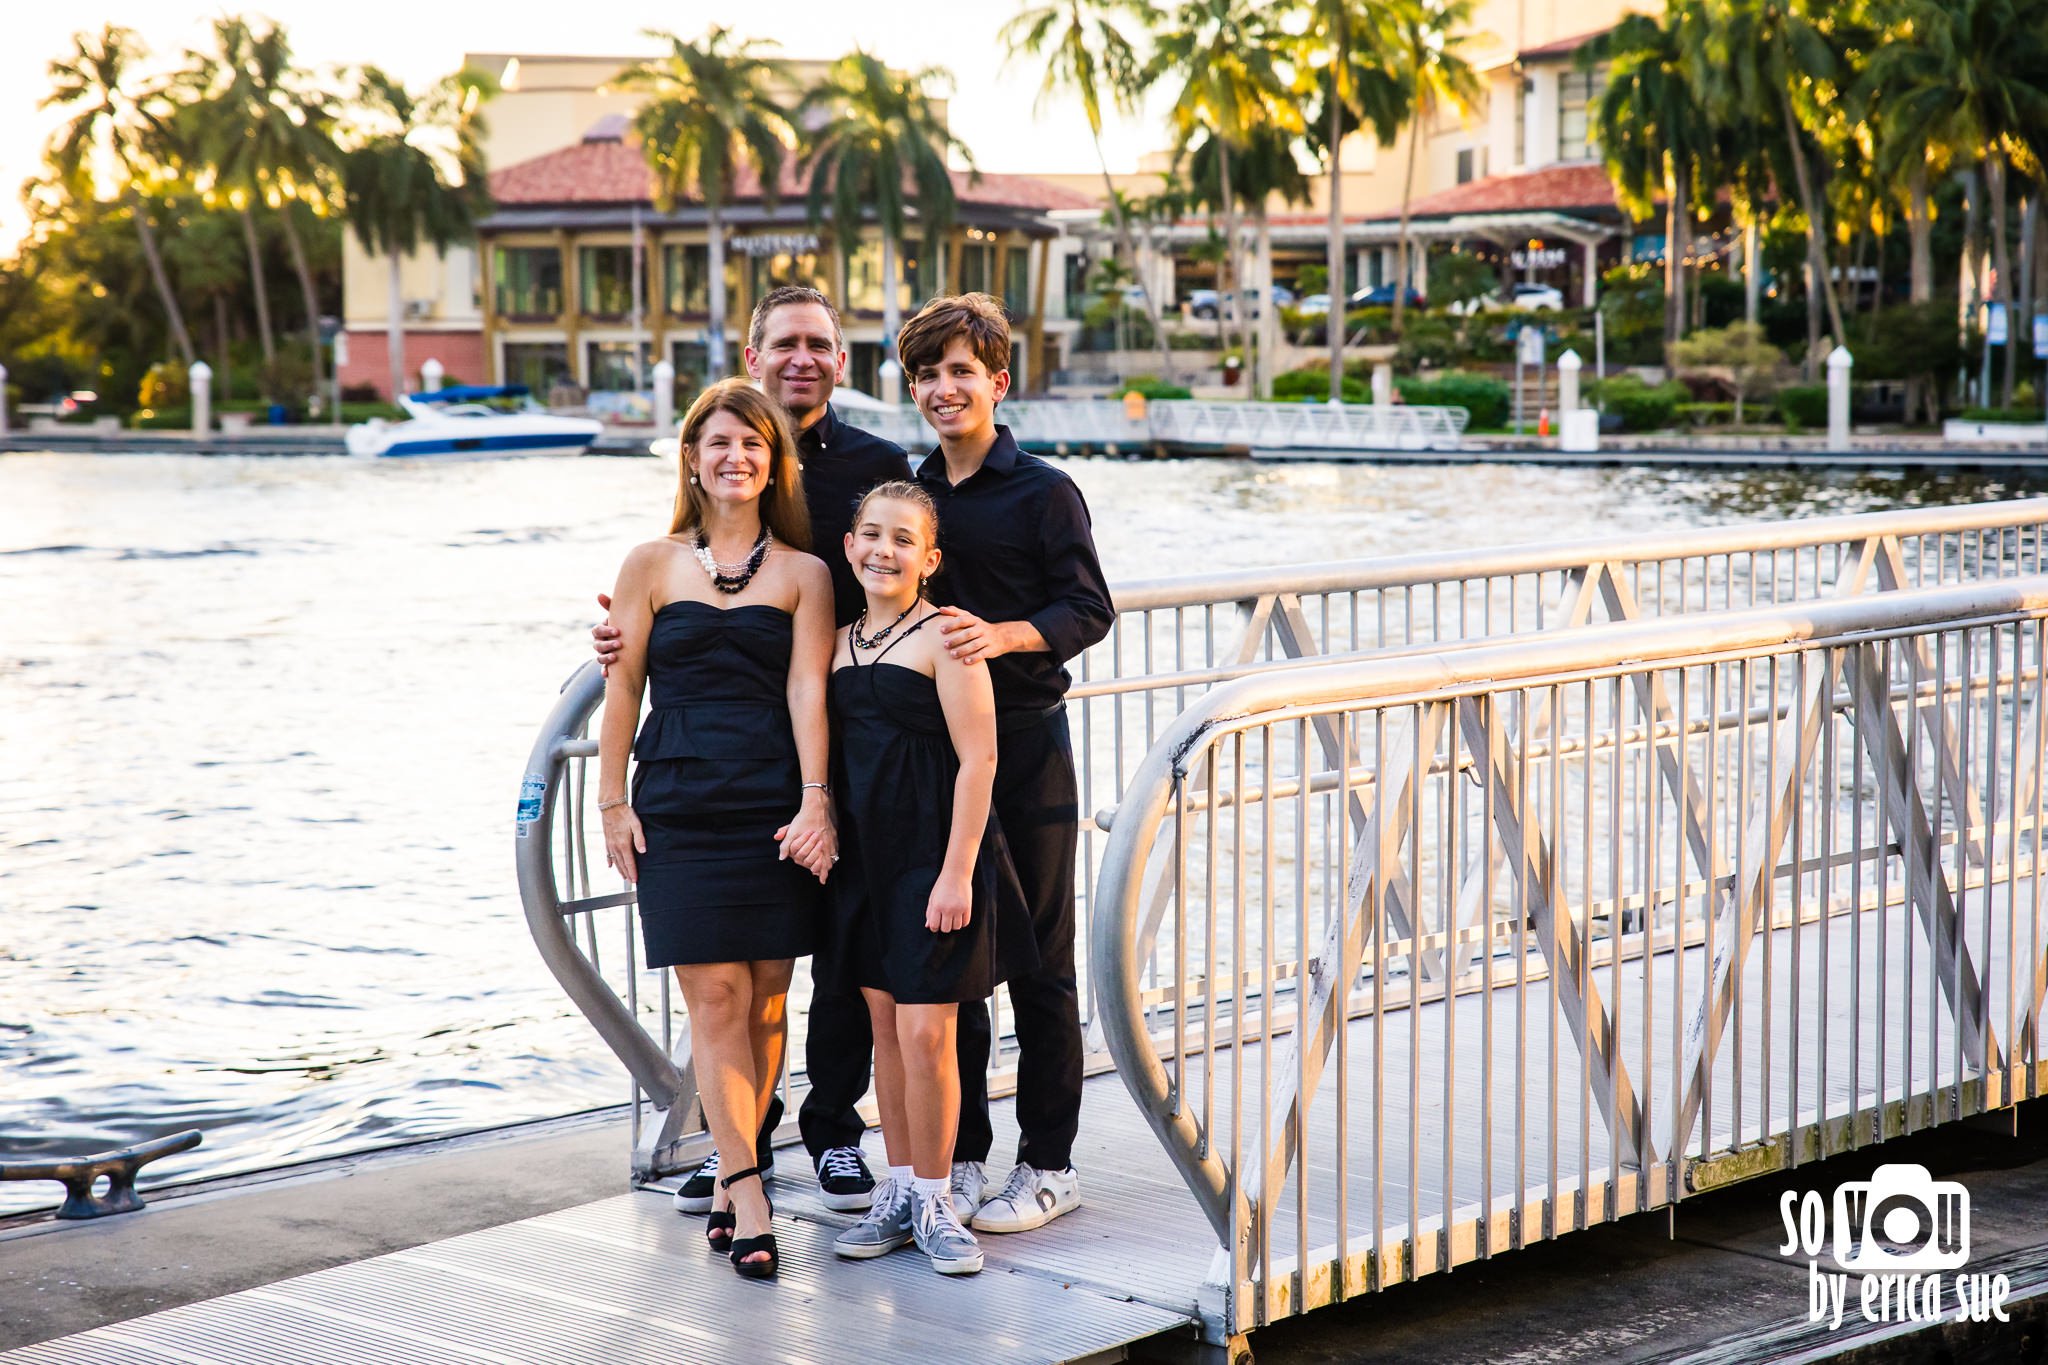 11-riverwalk-ft-lauderdale-lifestyle-family-photographer-so-you-by-erica-sue-ES1_3925.JPG